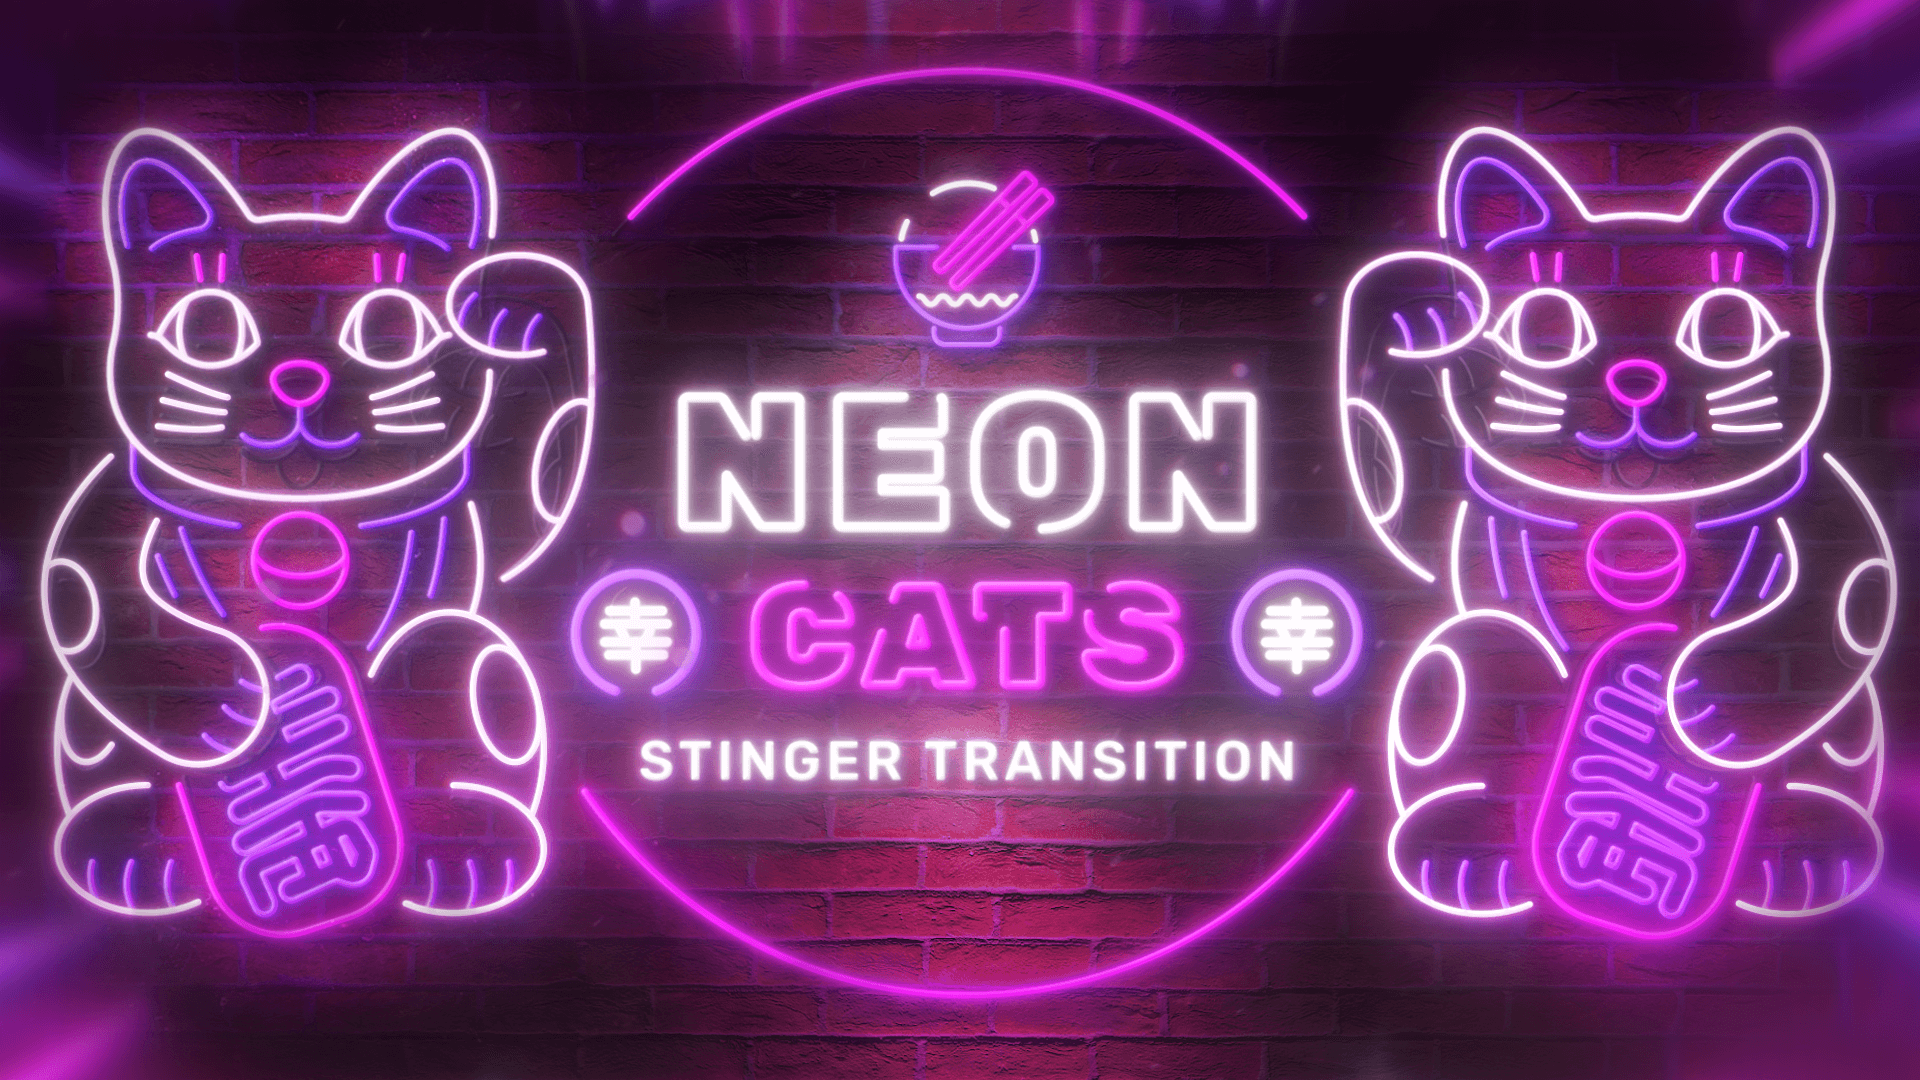 Neon Cats - Stinger Transition for Twitch, Youtube and Facebook